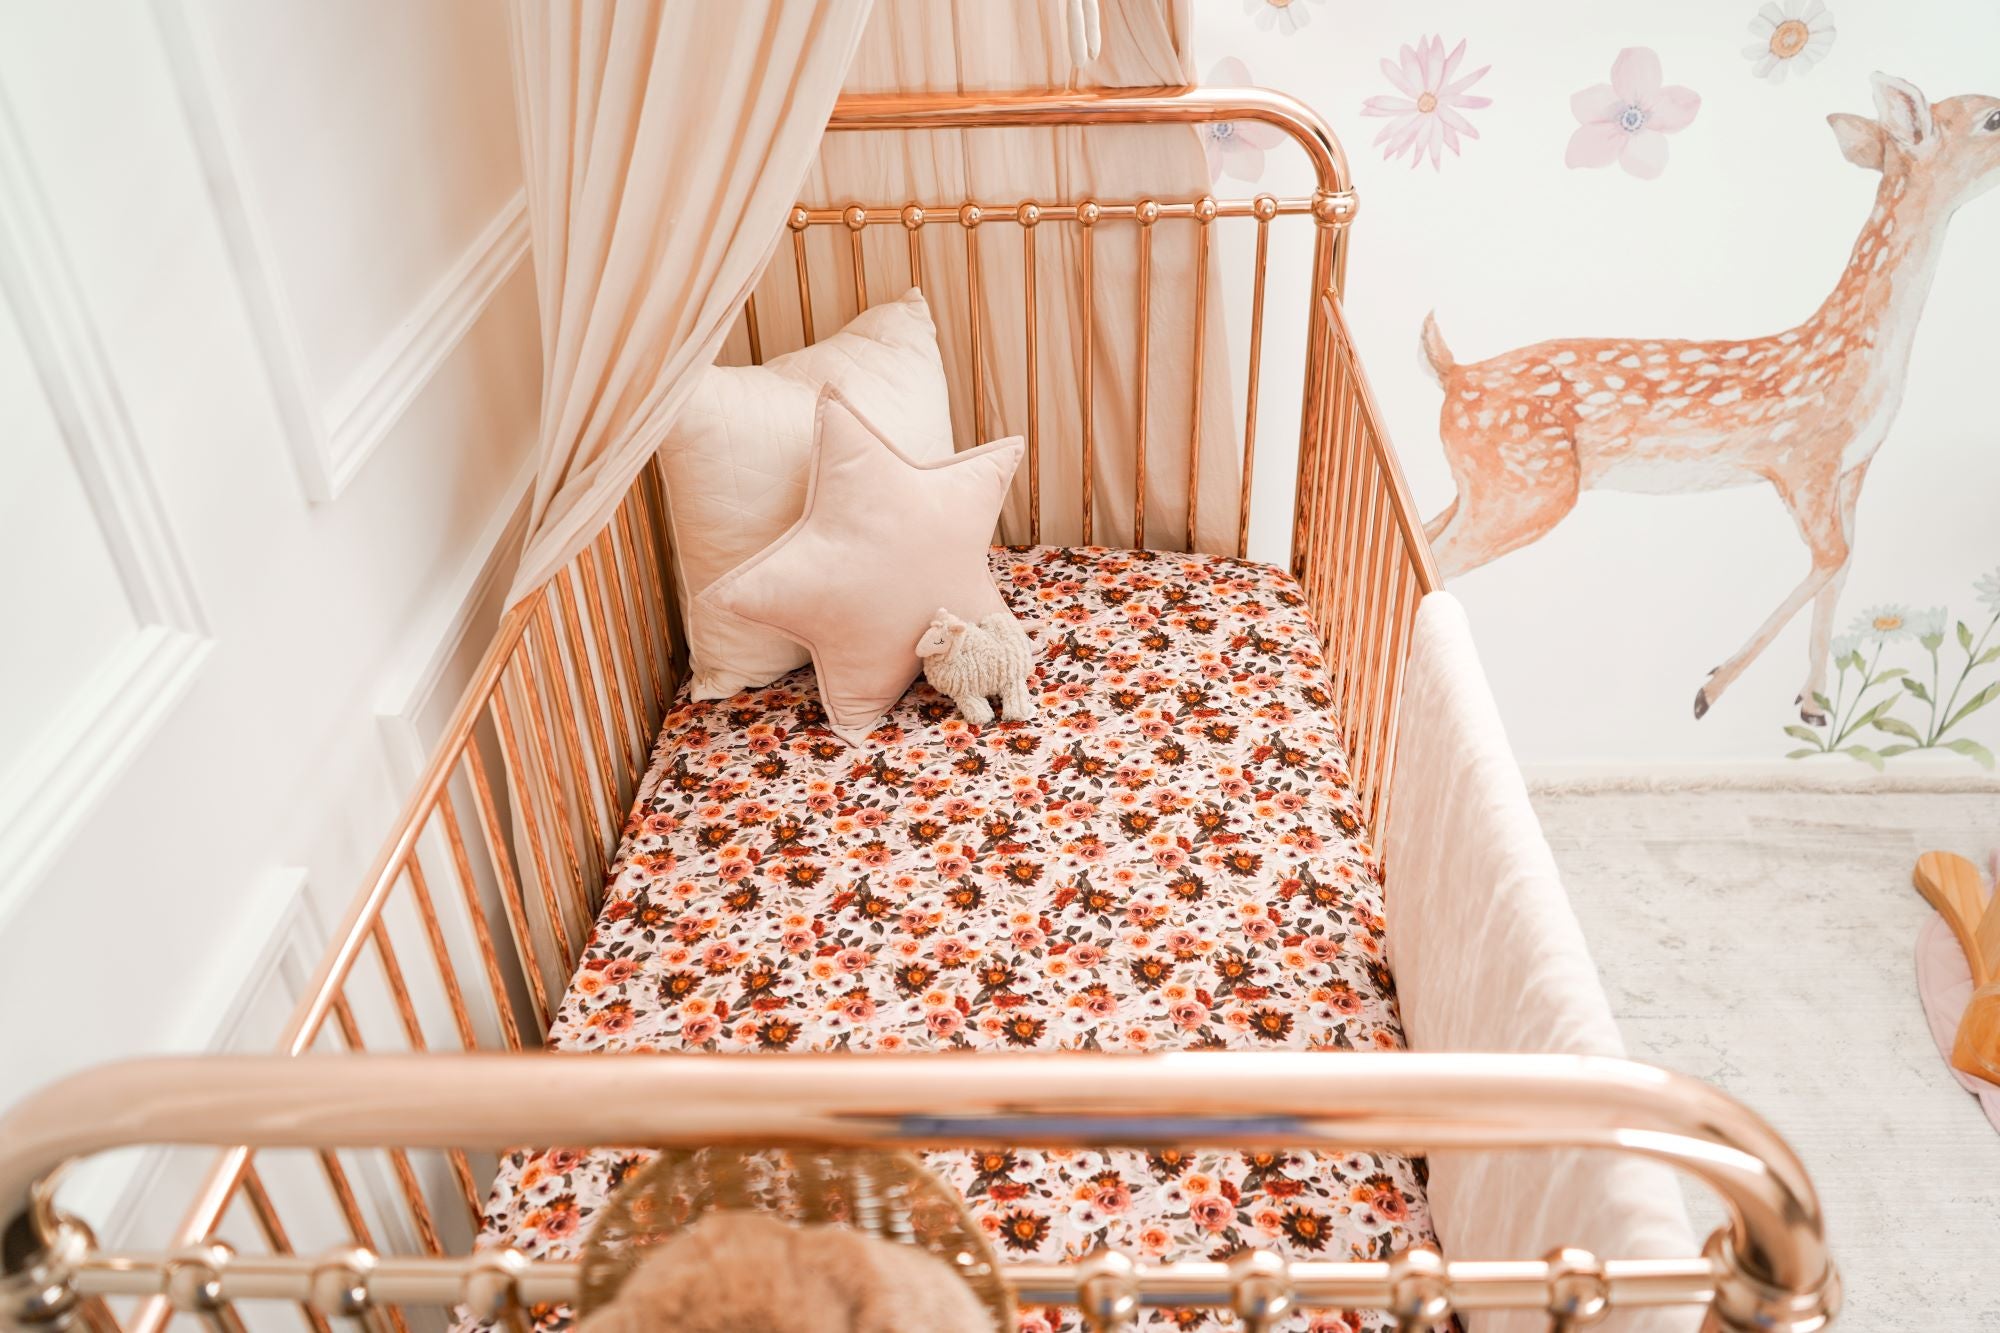 Organic Cotton Crib Sheet: Snuggly Jacks Canadian, Fitted and Stylish, Perfect for a Modern Nursery